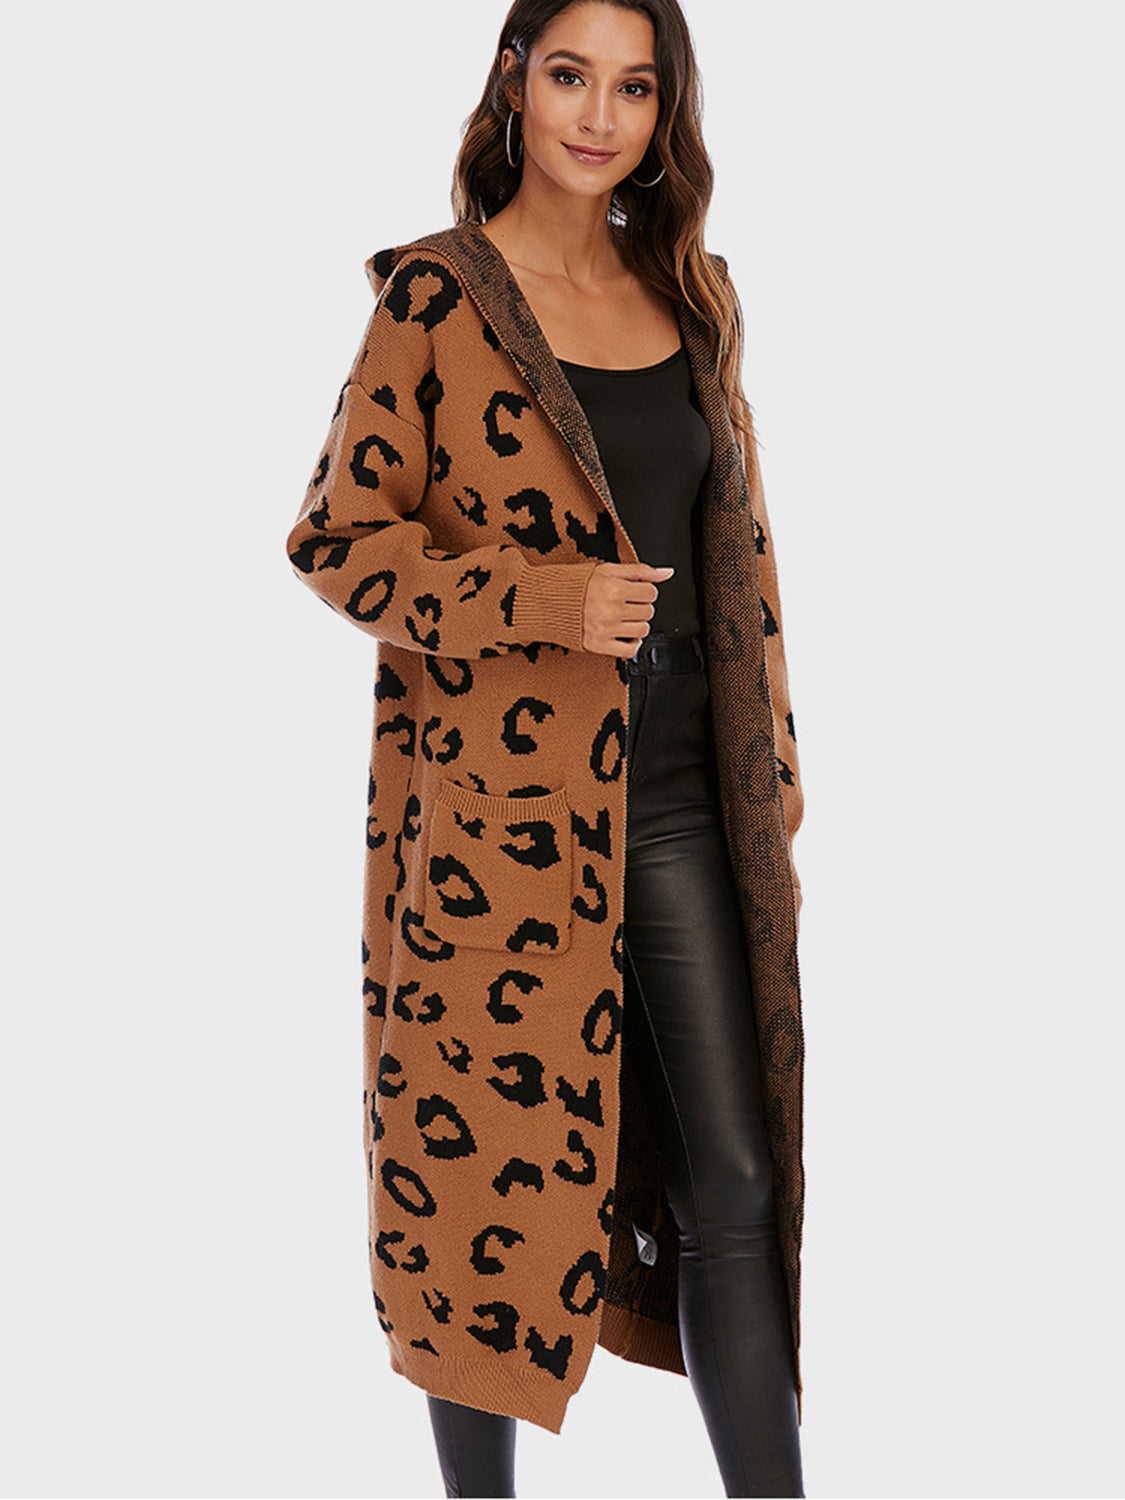 Leopard Hooded Cardigan with Pockets - Women’s Clothing & Accessories - Shirts & Tops - 8 - 2024